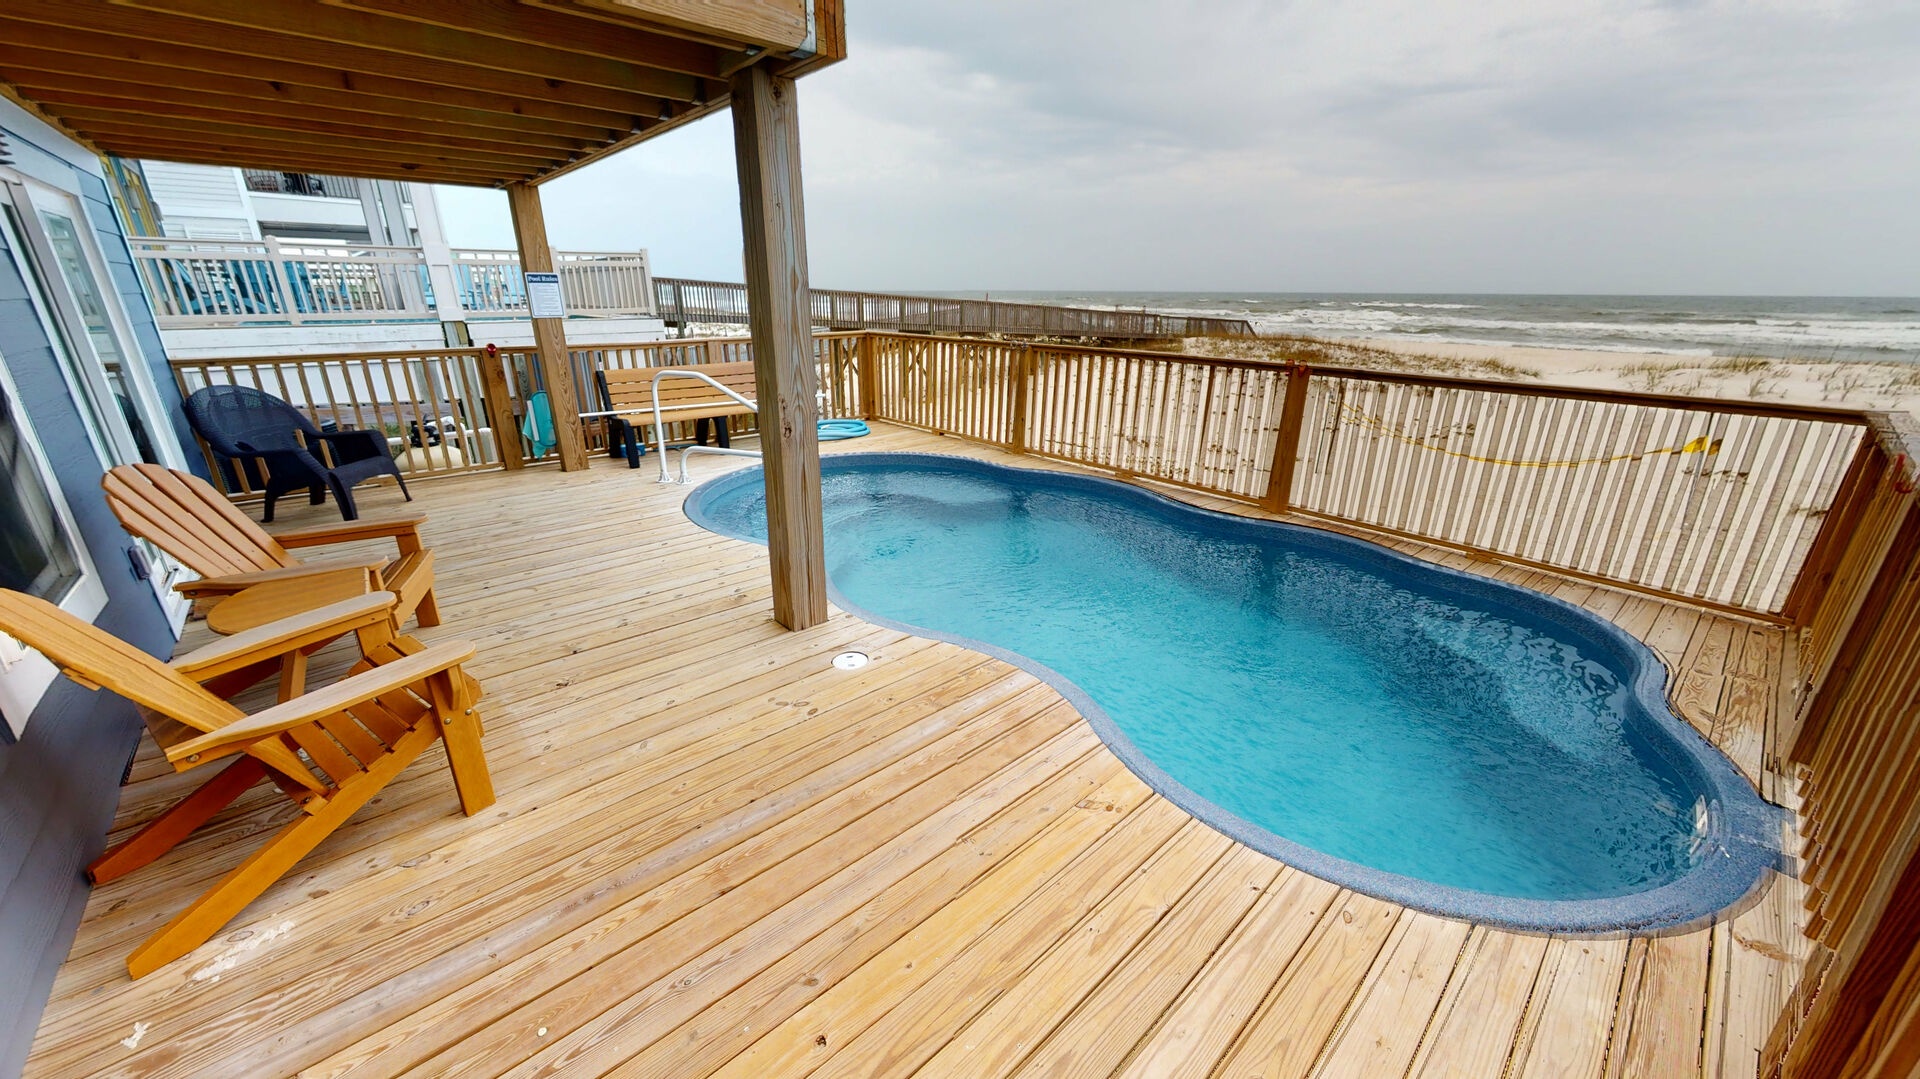 Beautiful new deck with built-in pool and some shaded area when you need to get out of the sun